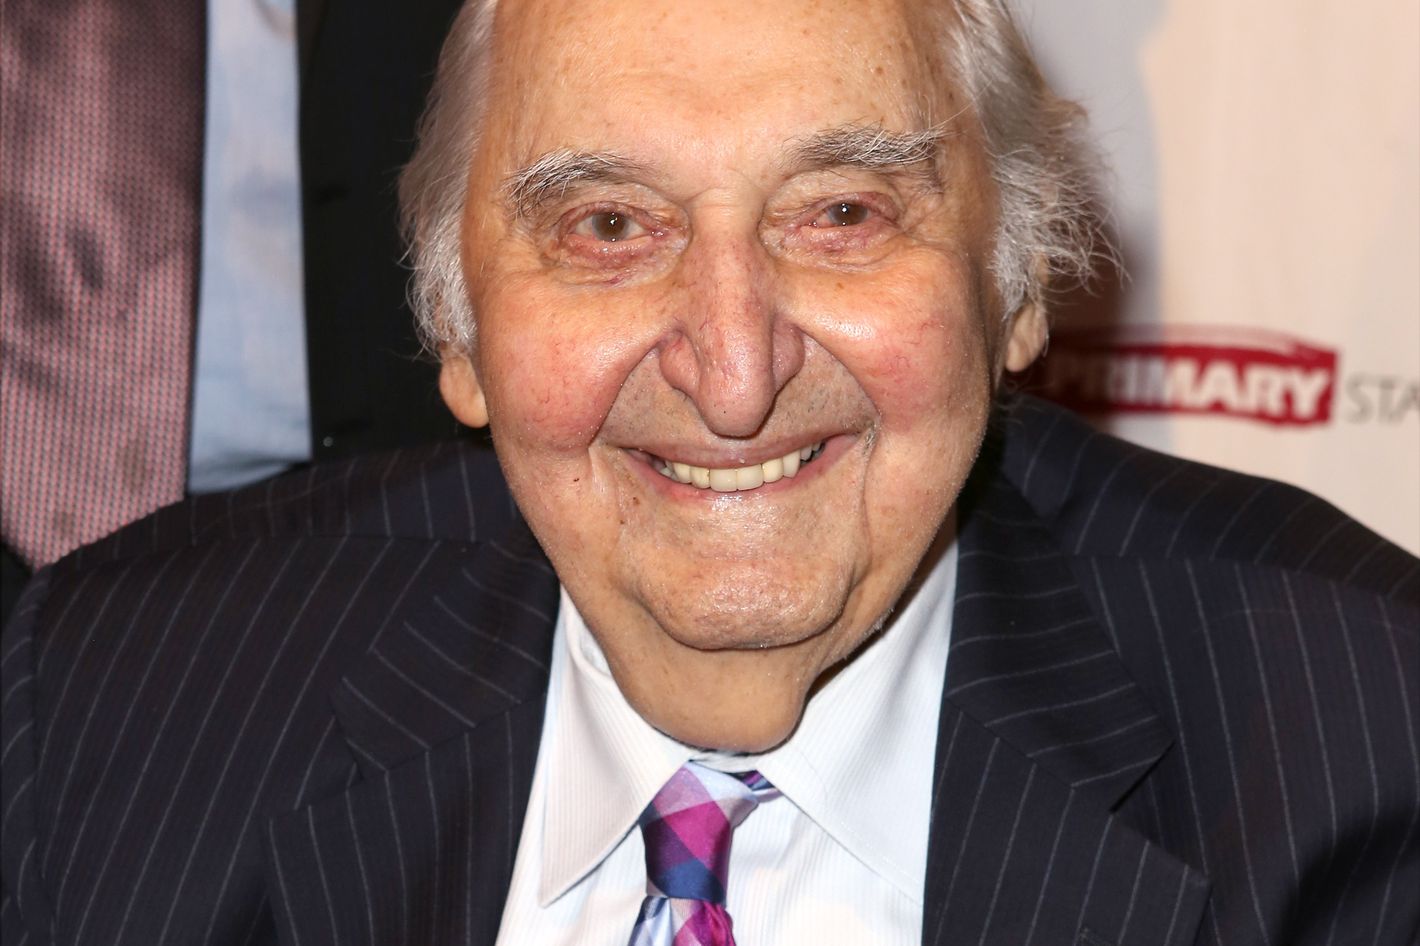 Fyvush Finkel, Picket Fences Actor and Yiddish Theater Star, Dead at 93